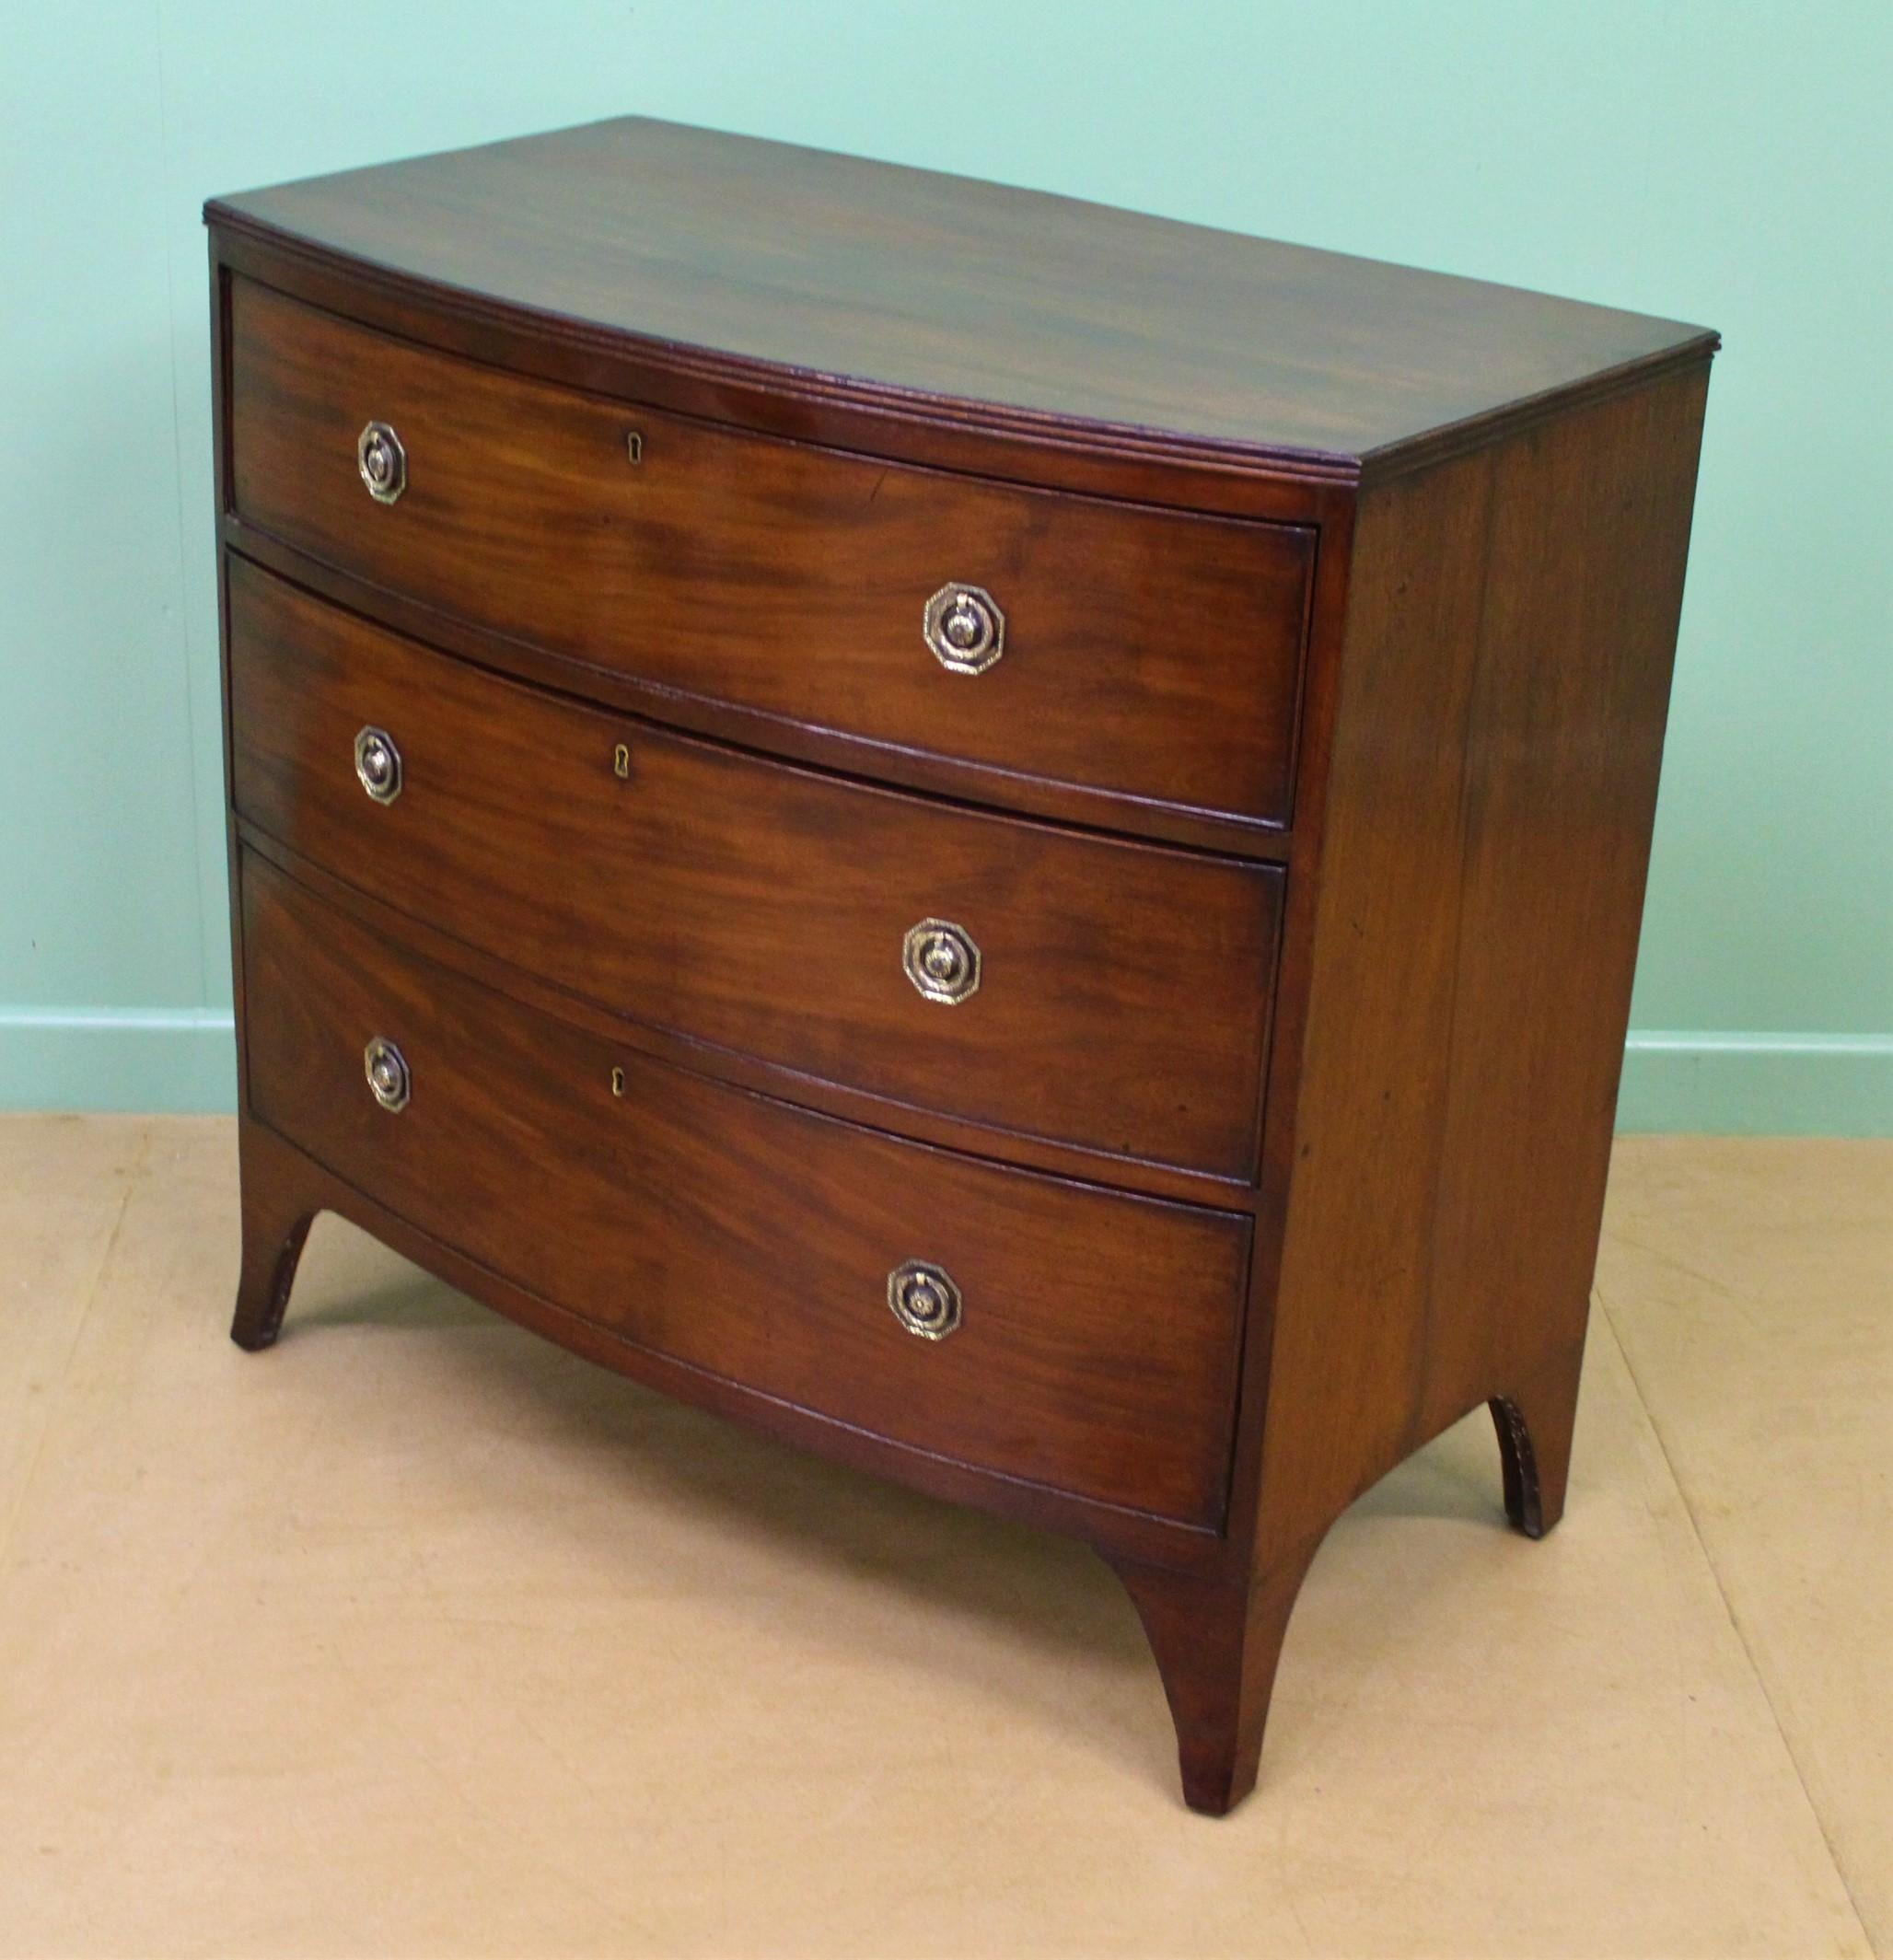 19th Century Georgian Mahogany Bow Fronted Chest of Drawers